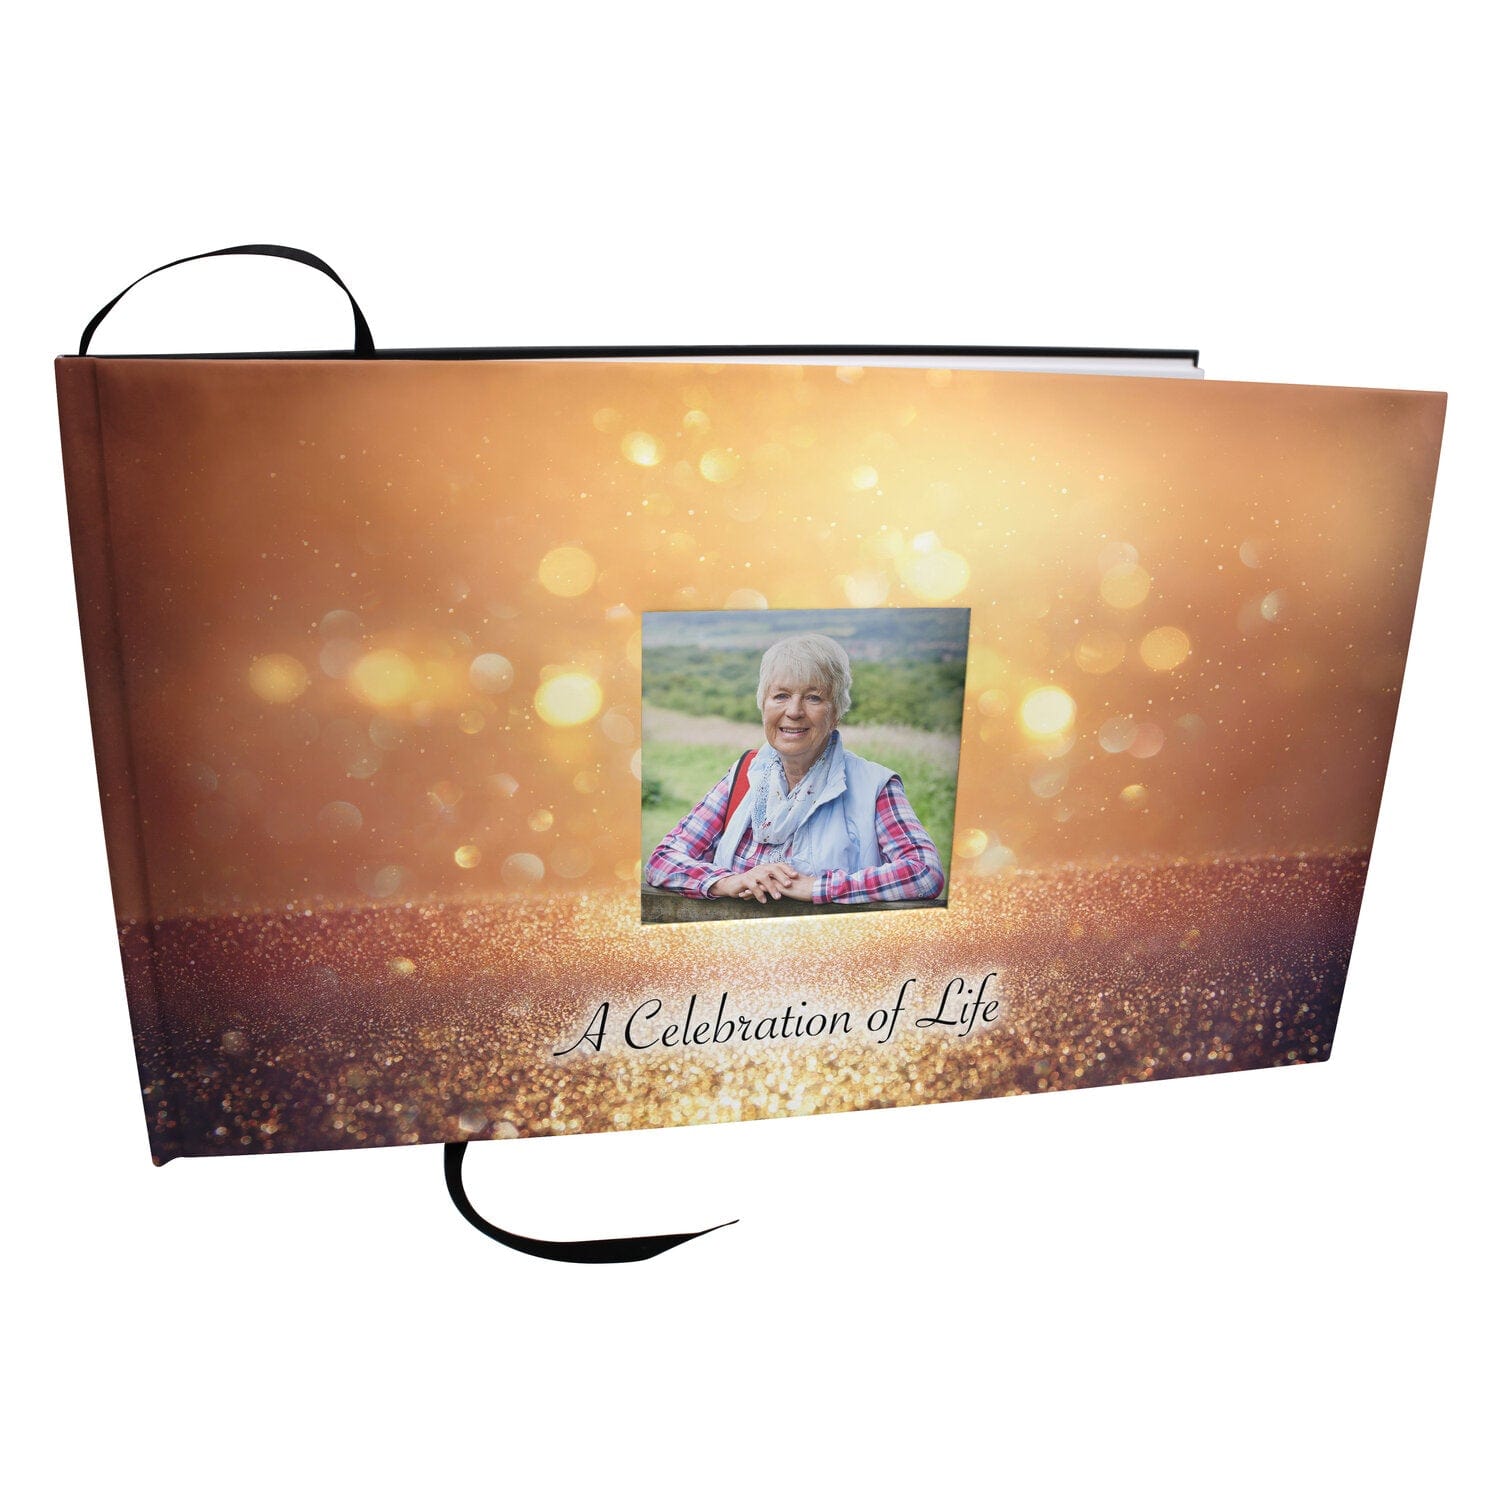 Commemorative Cremation Urns Home & Garden Guardian Angel (Gold) Matching Themed 'Celebration of Life' Guest Book for Funeral or Memorial Service